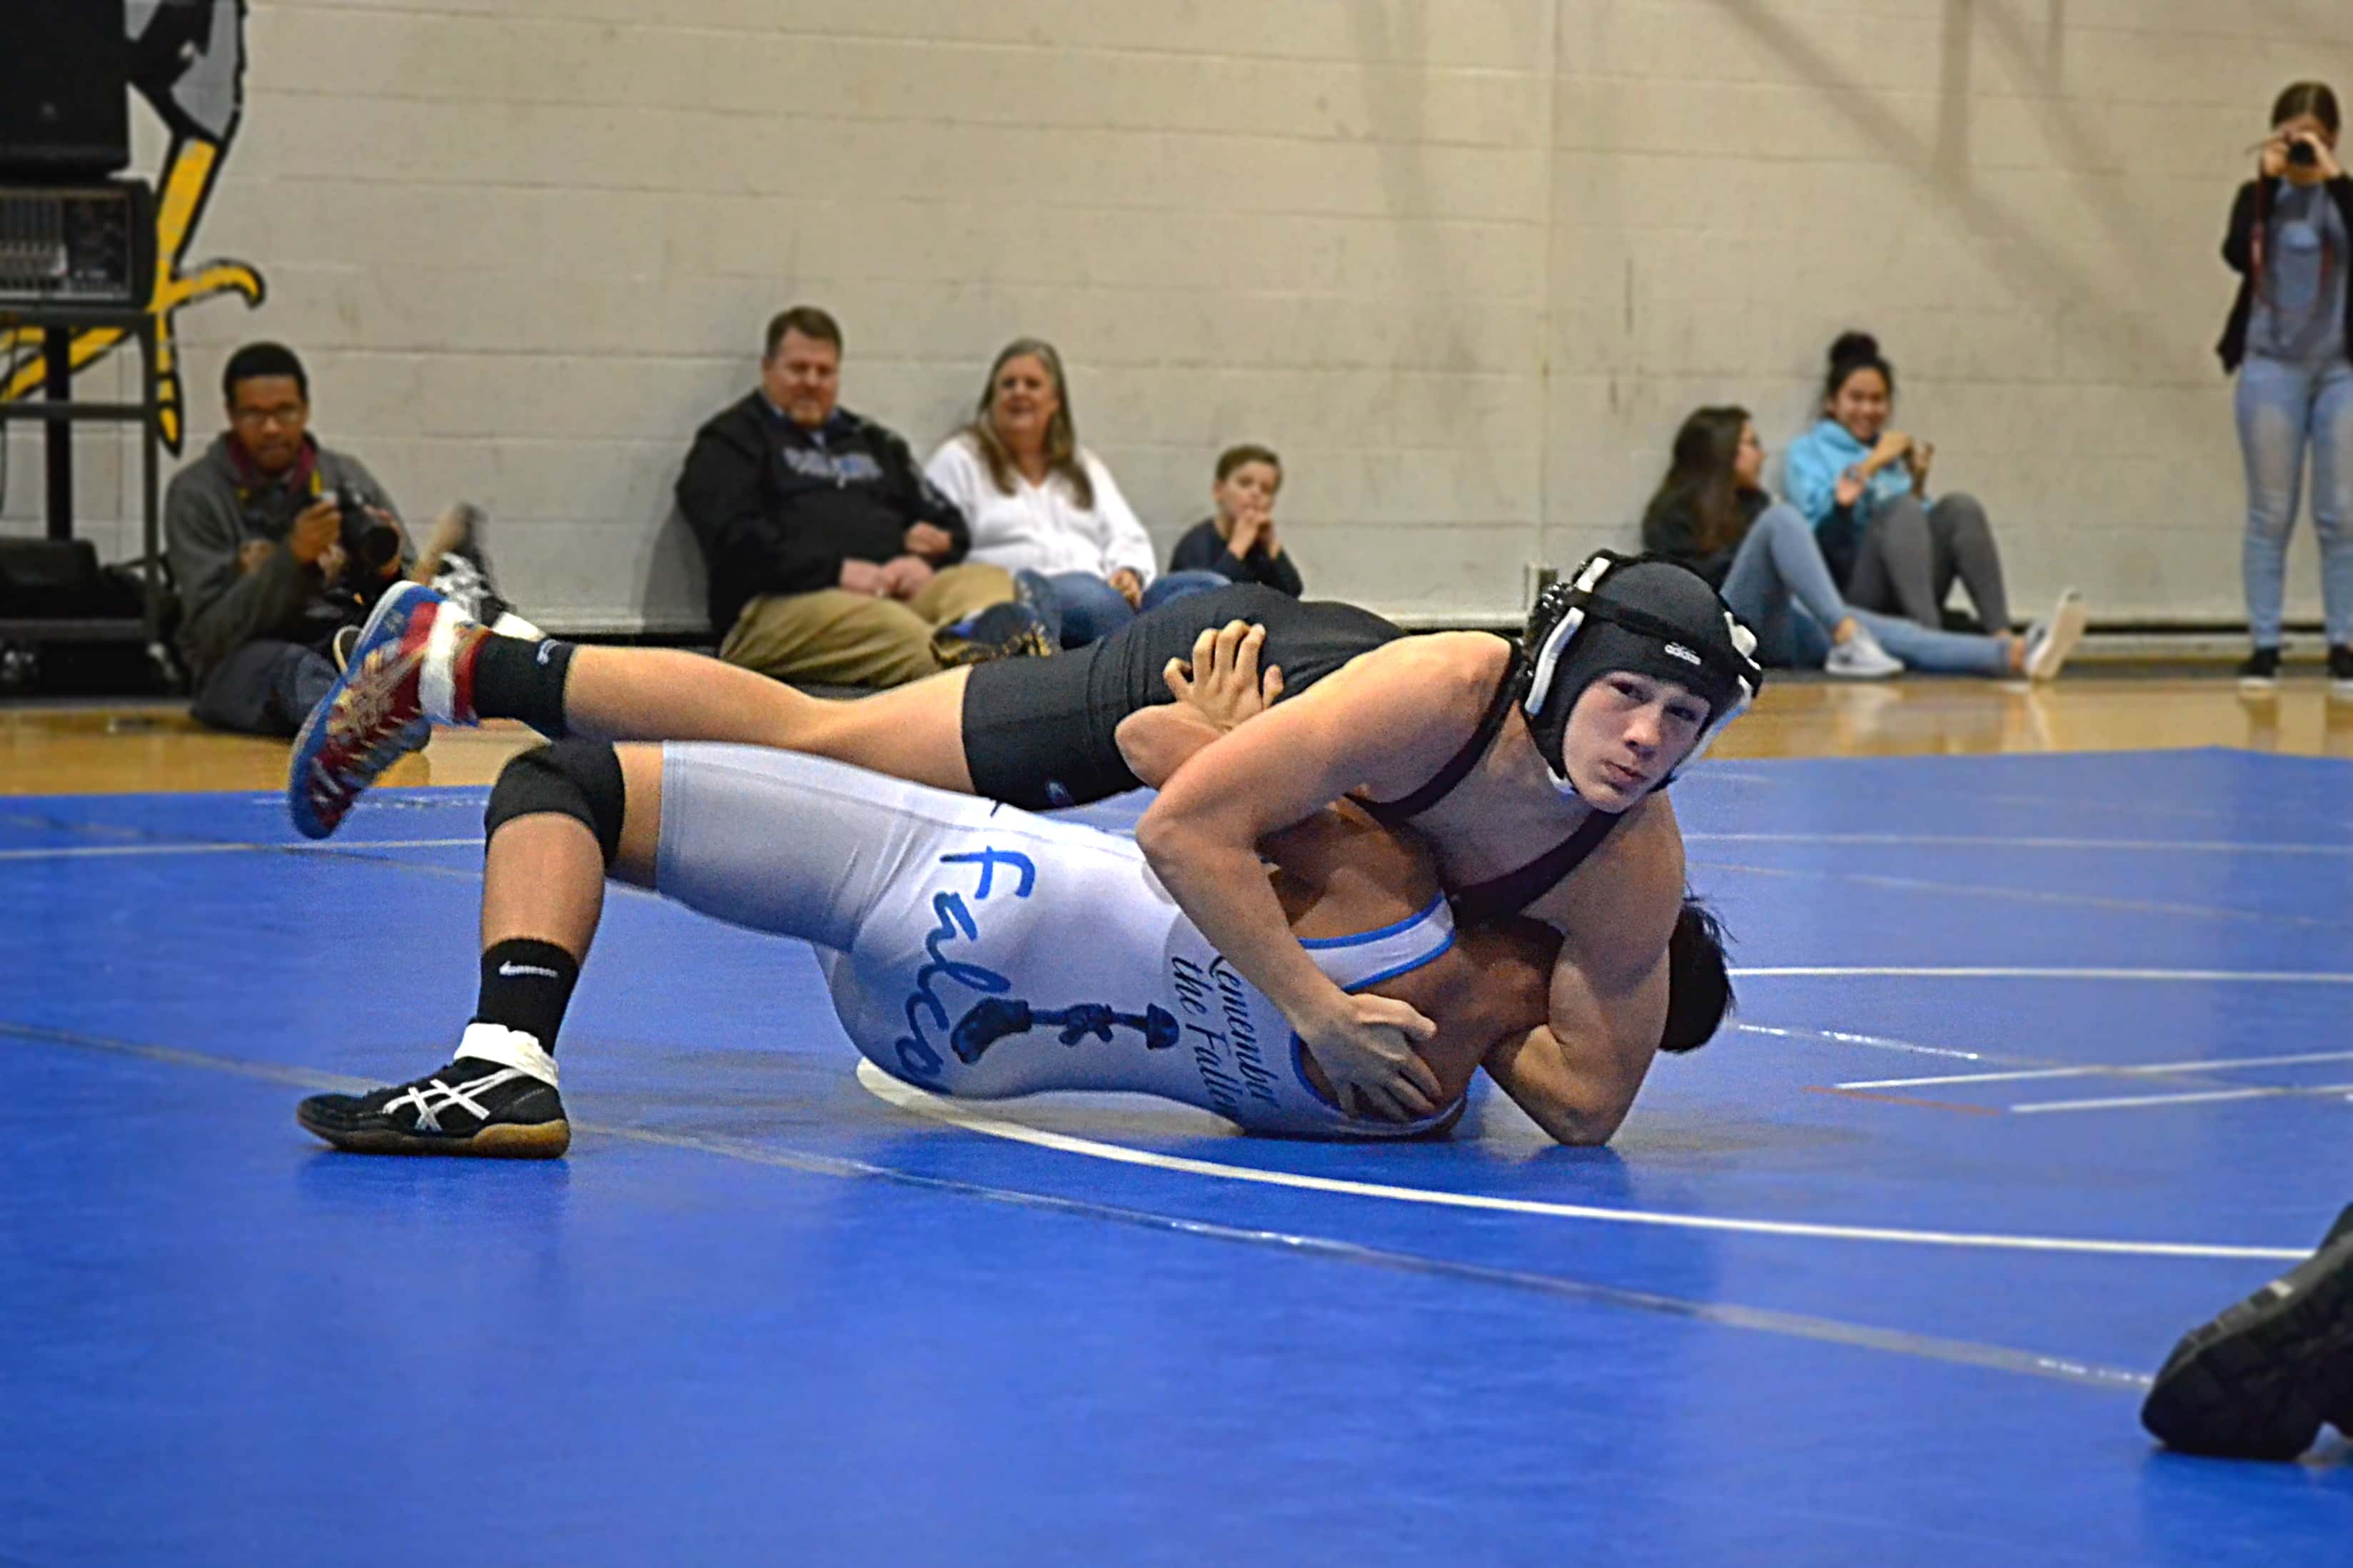 Keegan Slone pinned Ft Campbell’s Johnny Paniagua at 138 lbs.: Keegan Slone pinned Ft Campbell's Johnny Paniagua at 138 lbs.